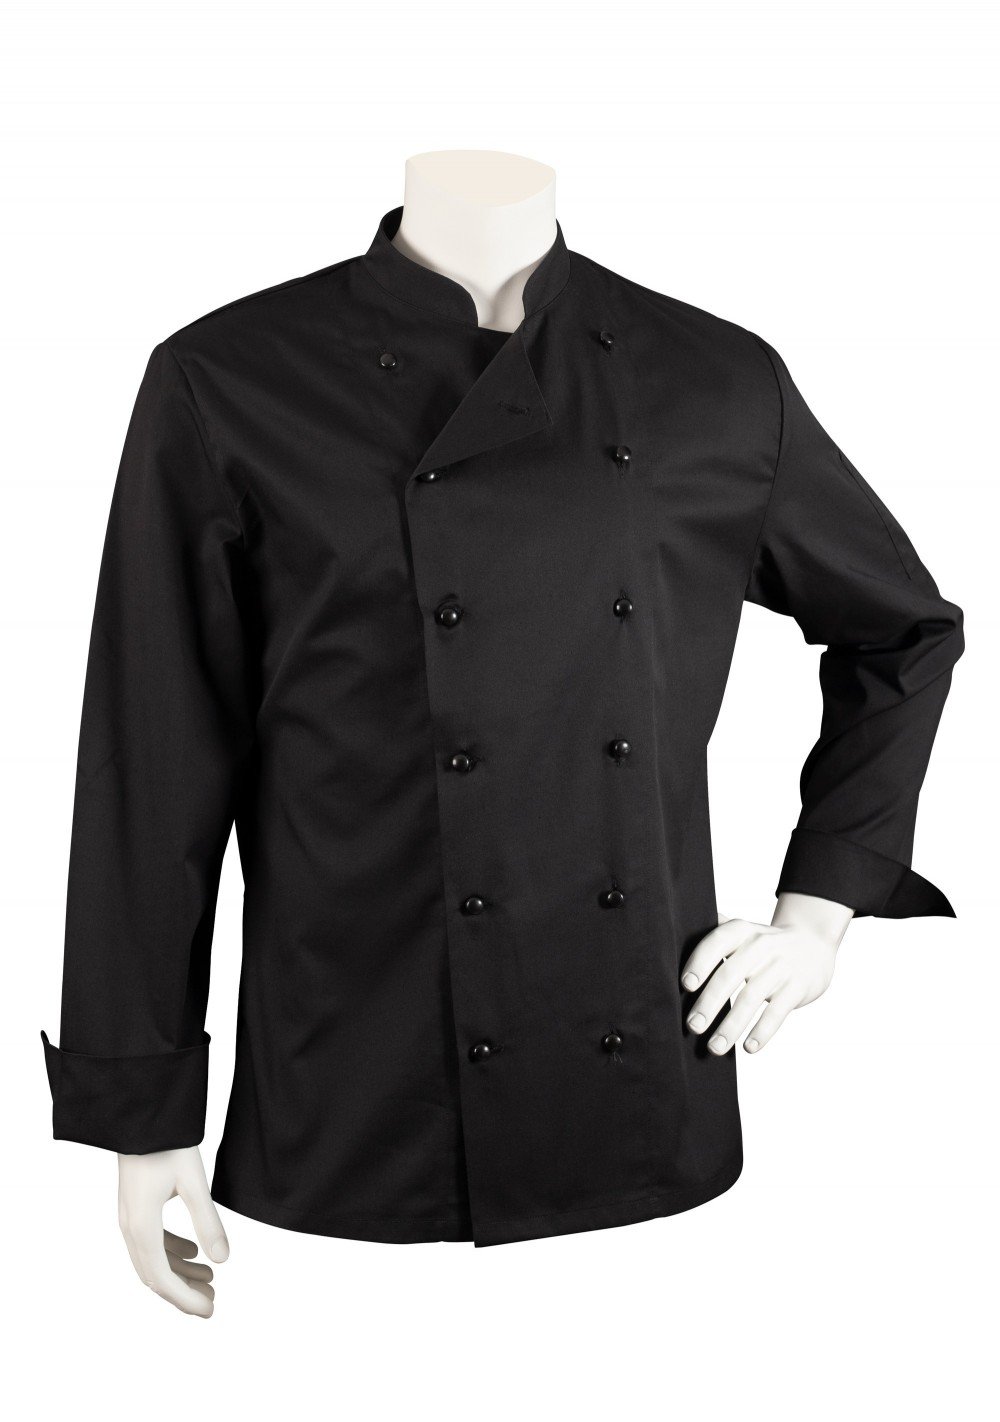 Executive Chef Cooking Jacket in Black in Unisex Fit Front